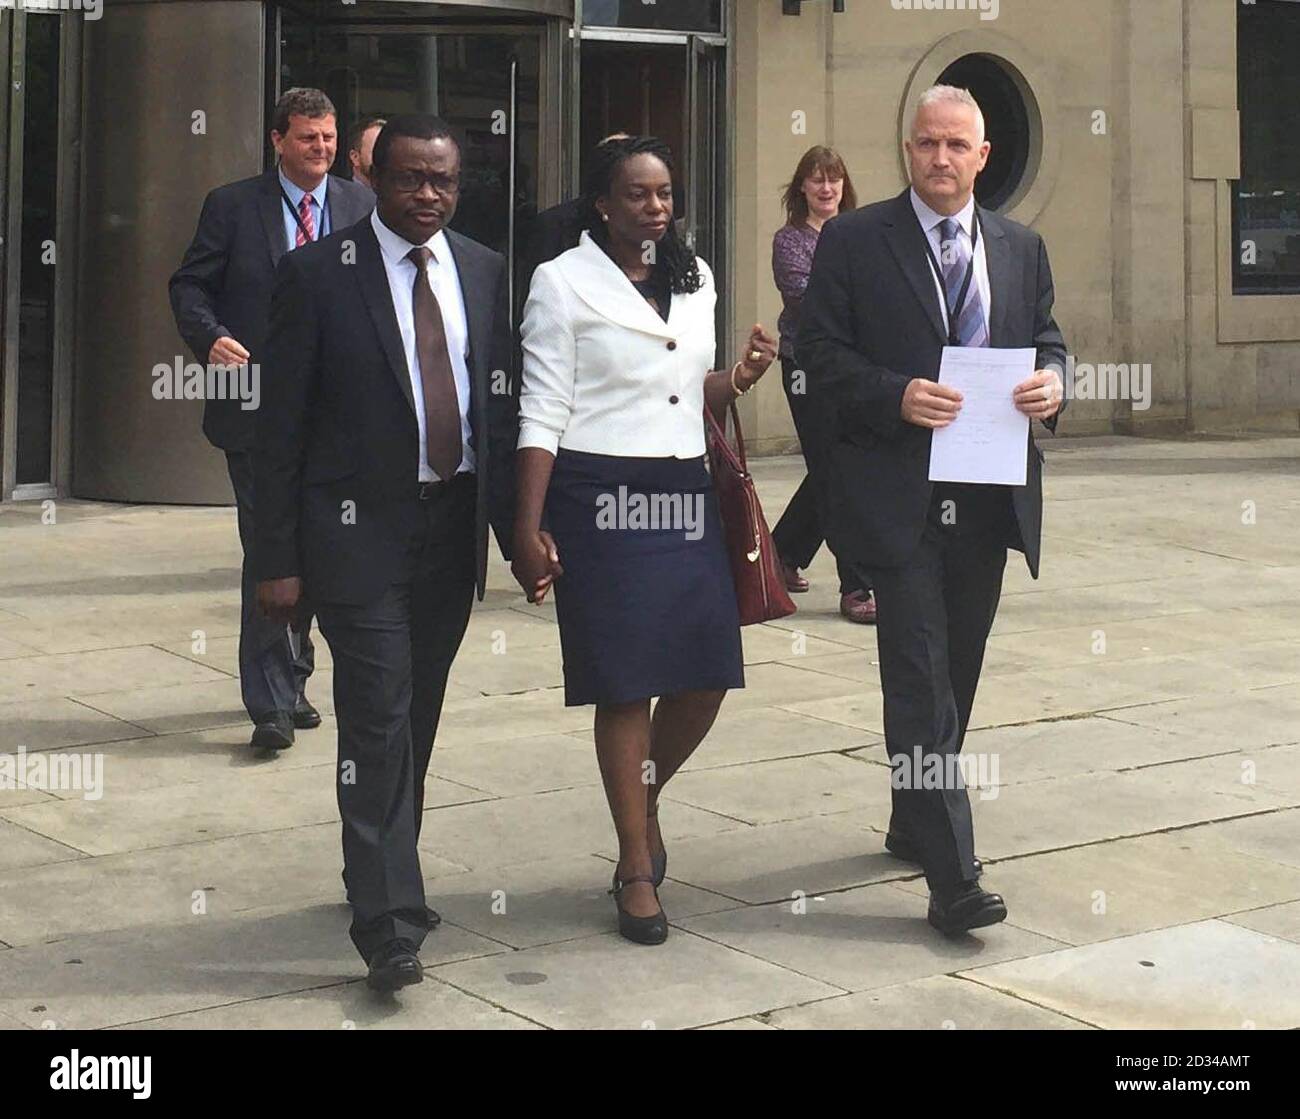 Vincent Uzomah with his wife his wife Uduak and Detective Superintendent Simon Atkinson, of West Yorkshire Police outside Bradford Crown Court after a 14-year-old boy who bragged on Facebook about stabbing the supply teacher in a racially motivated attack has been sentenced to 11 years detention. Stock Photo